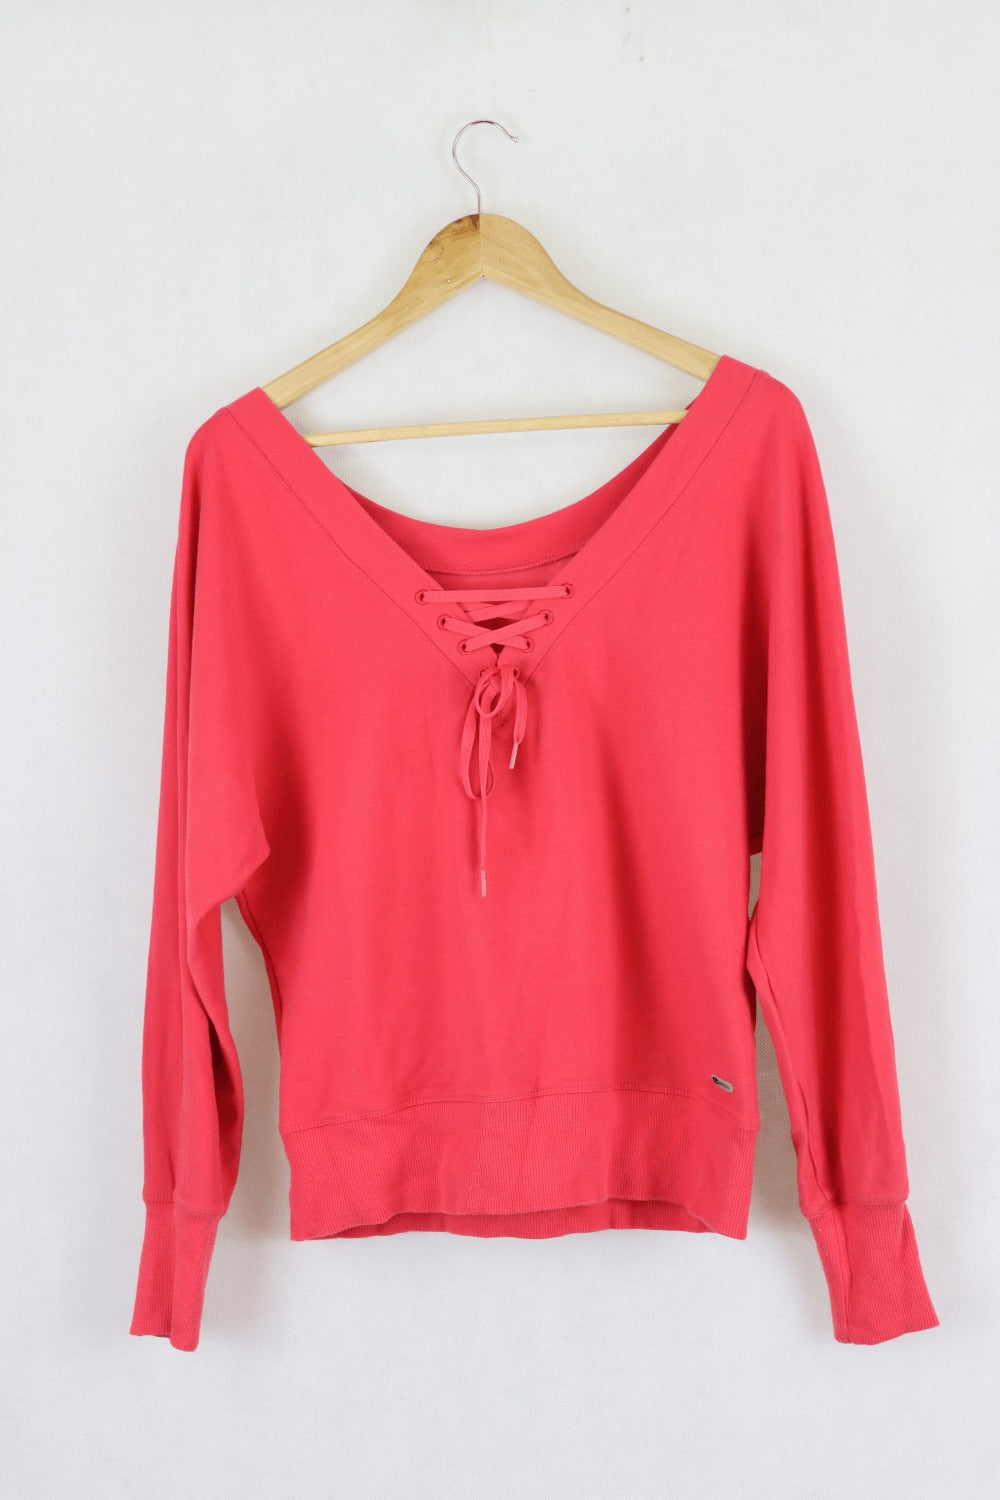 Puma Pink Top With Lace Up Detail L